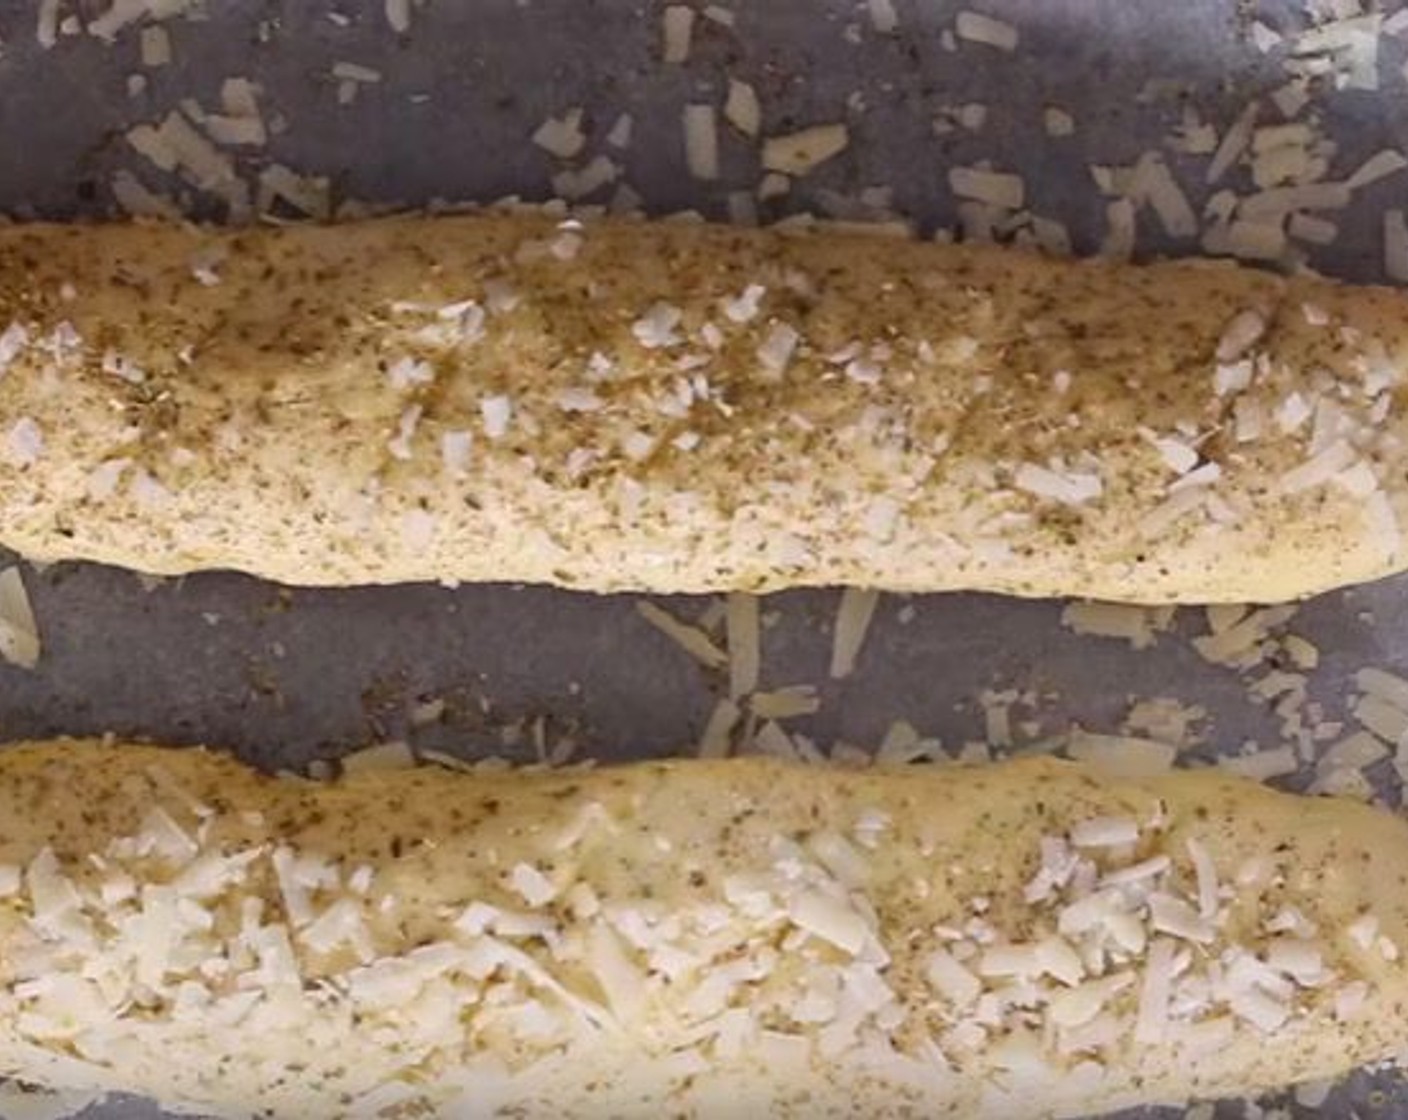 step 10 Sprinkle over Dried Oregano (to taste) and Grated Parmesan Cheese (to taste). Turn the loaves to coat both sides.